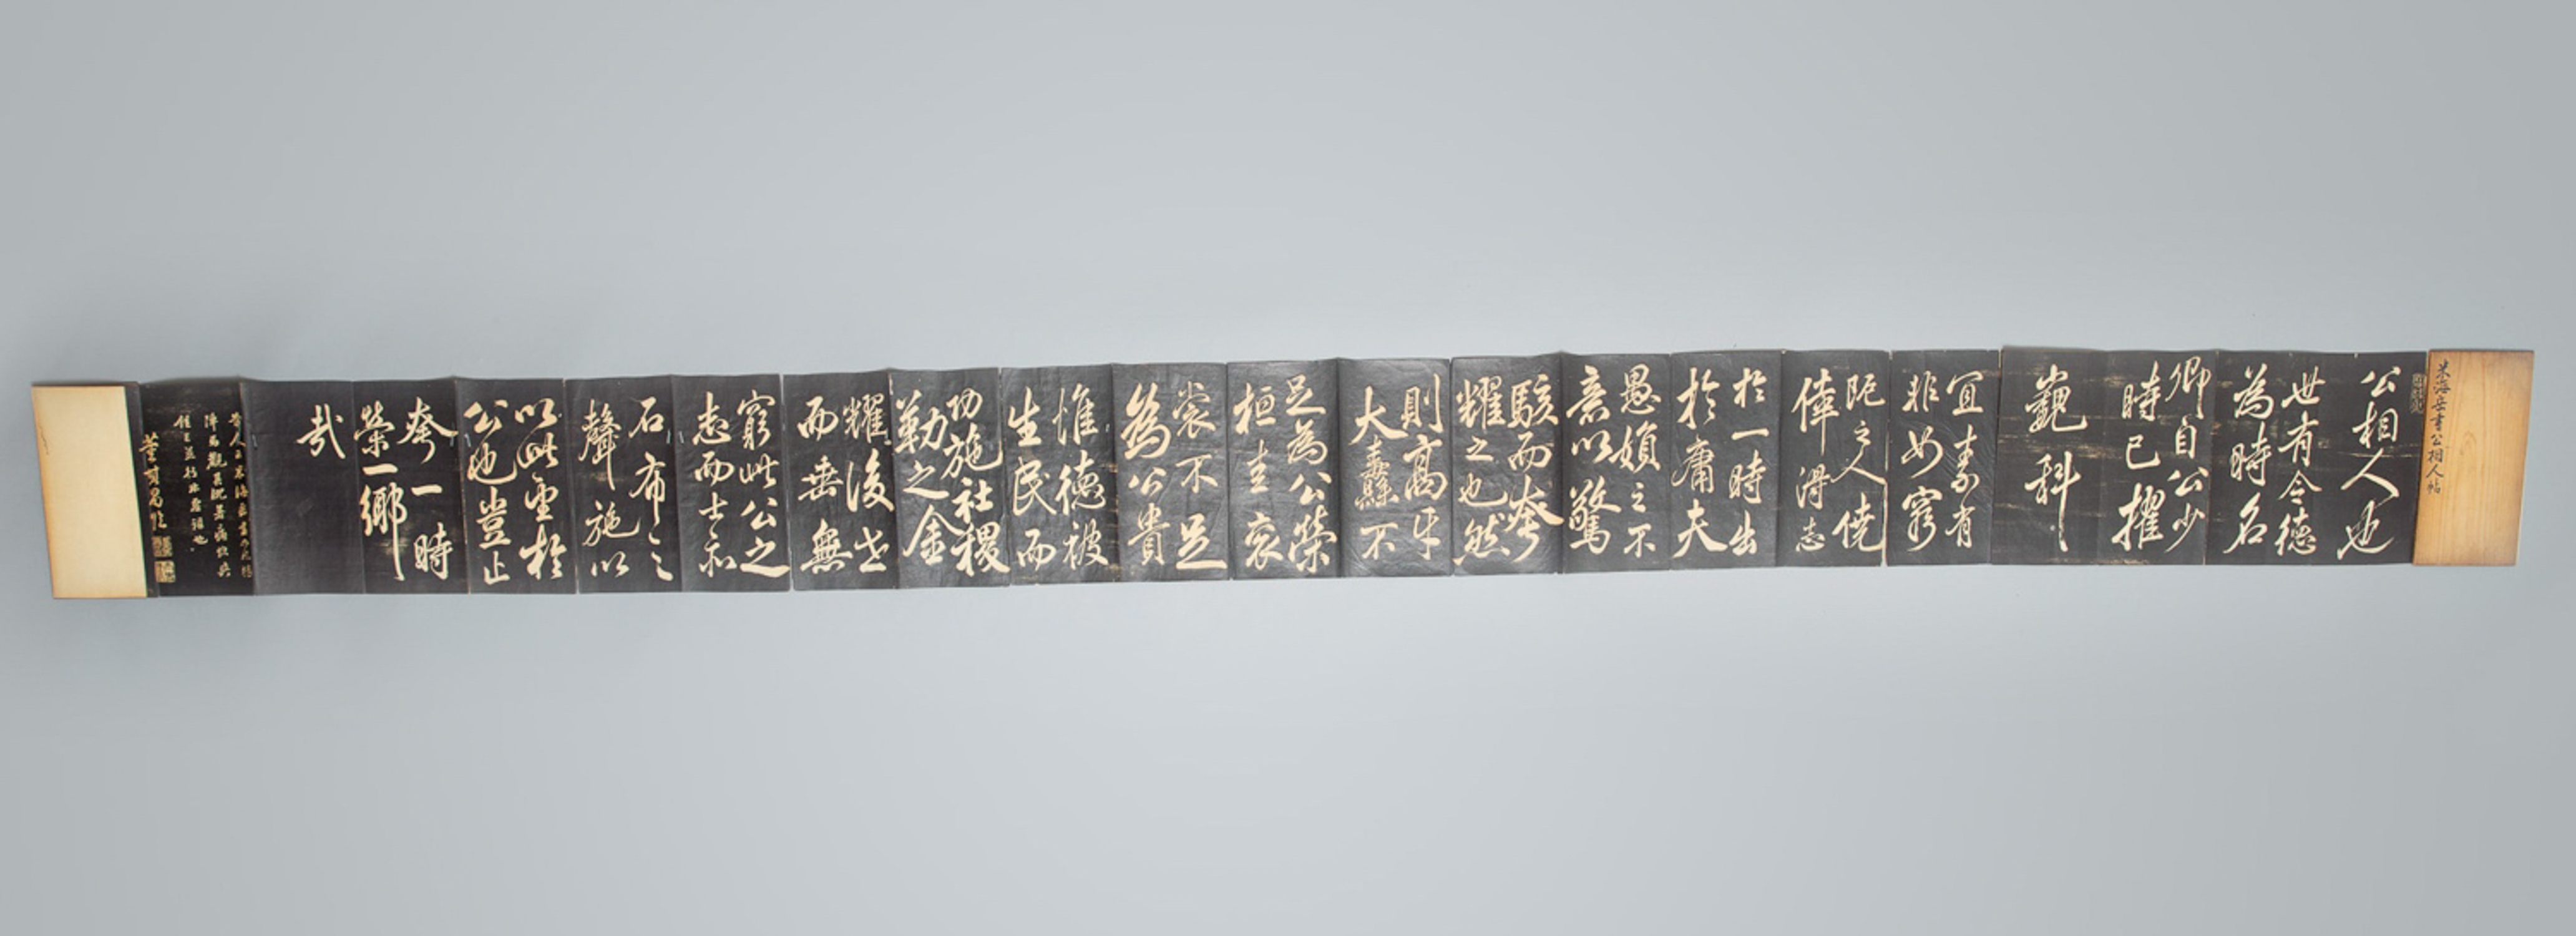 Chinese Temple Rubbing Mounted into Book - Image 7 of 8